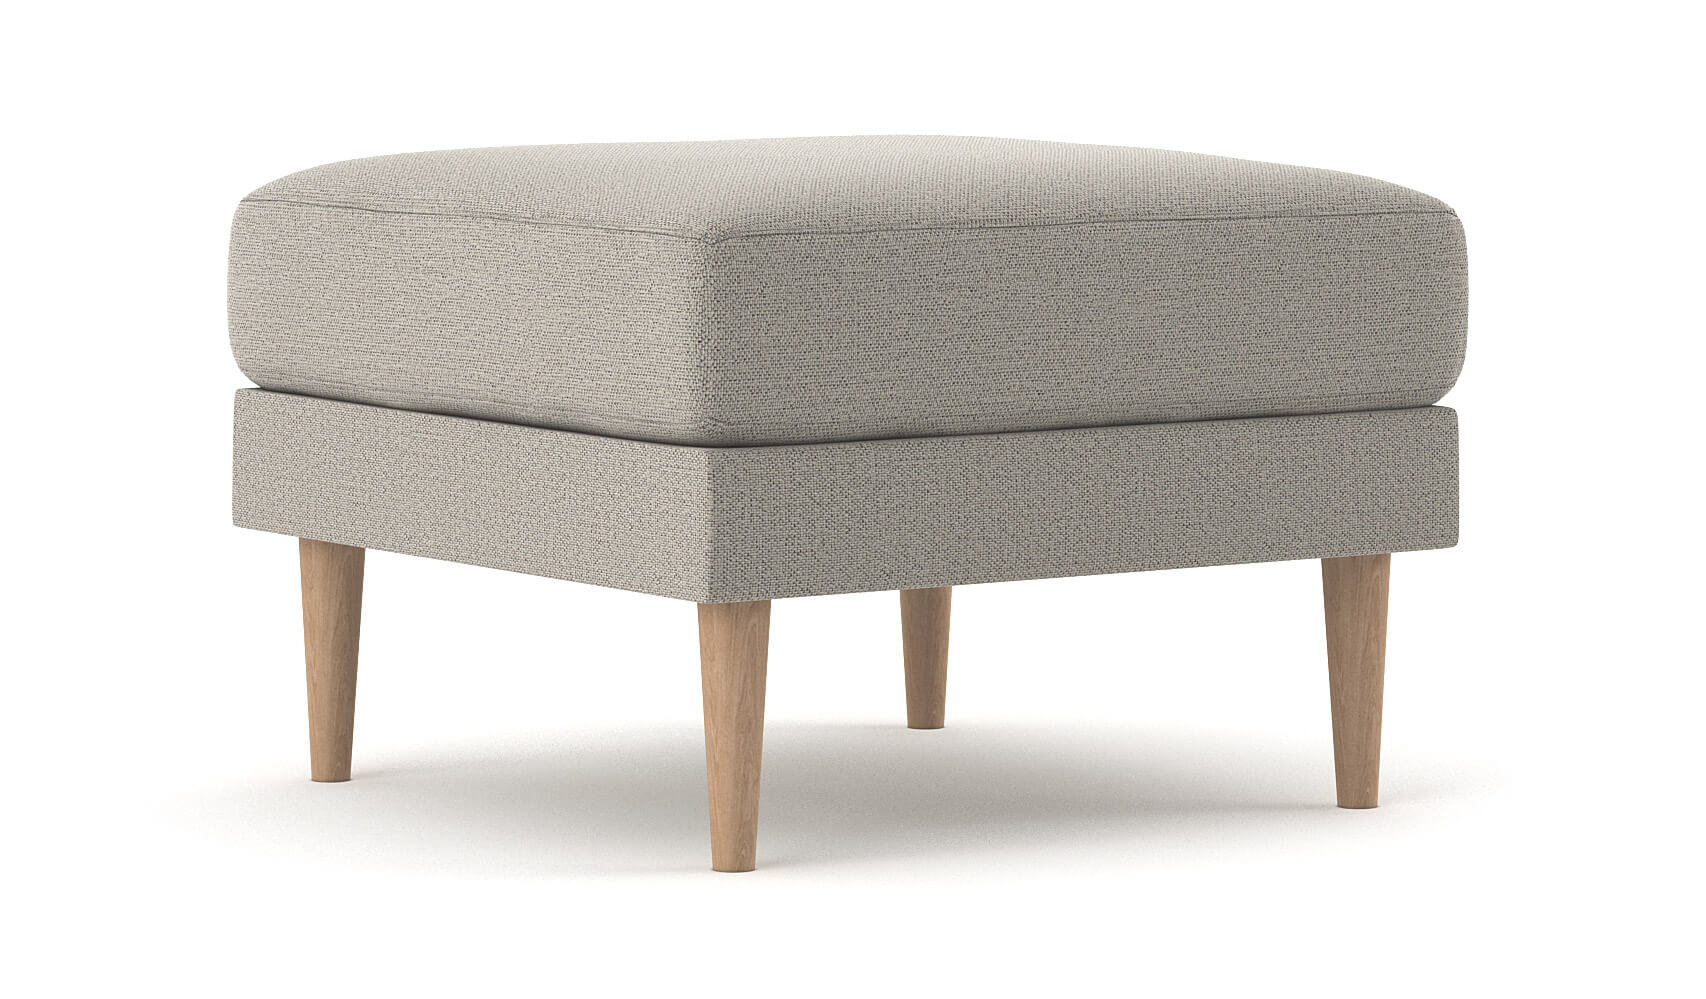 G: Dekayess Ottoman shown in Texture Oyster fabric and Thom Cafe legs